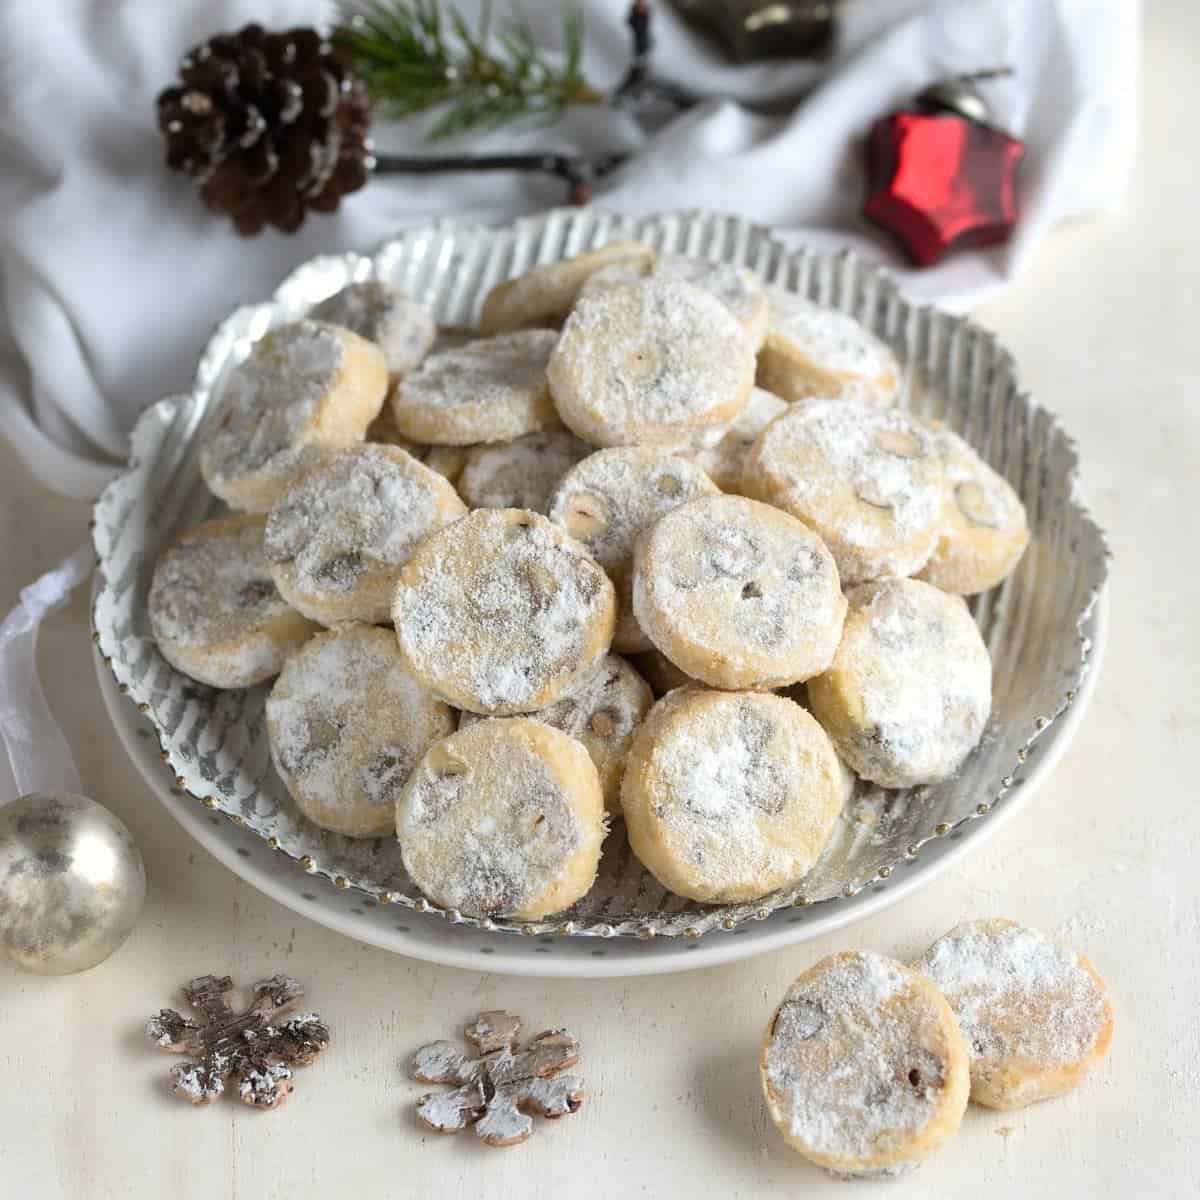 Czech Christmas Masaryk cookies served on a festive tray.